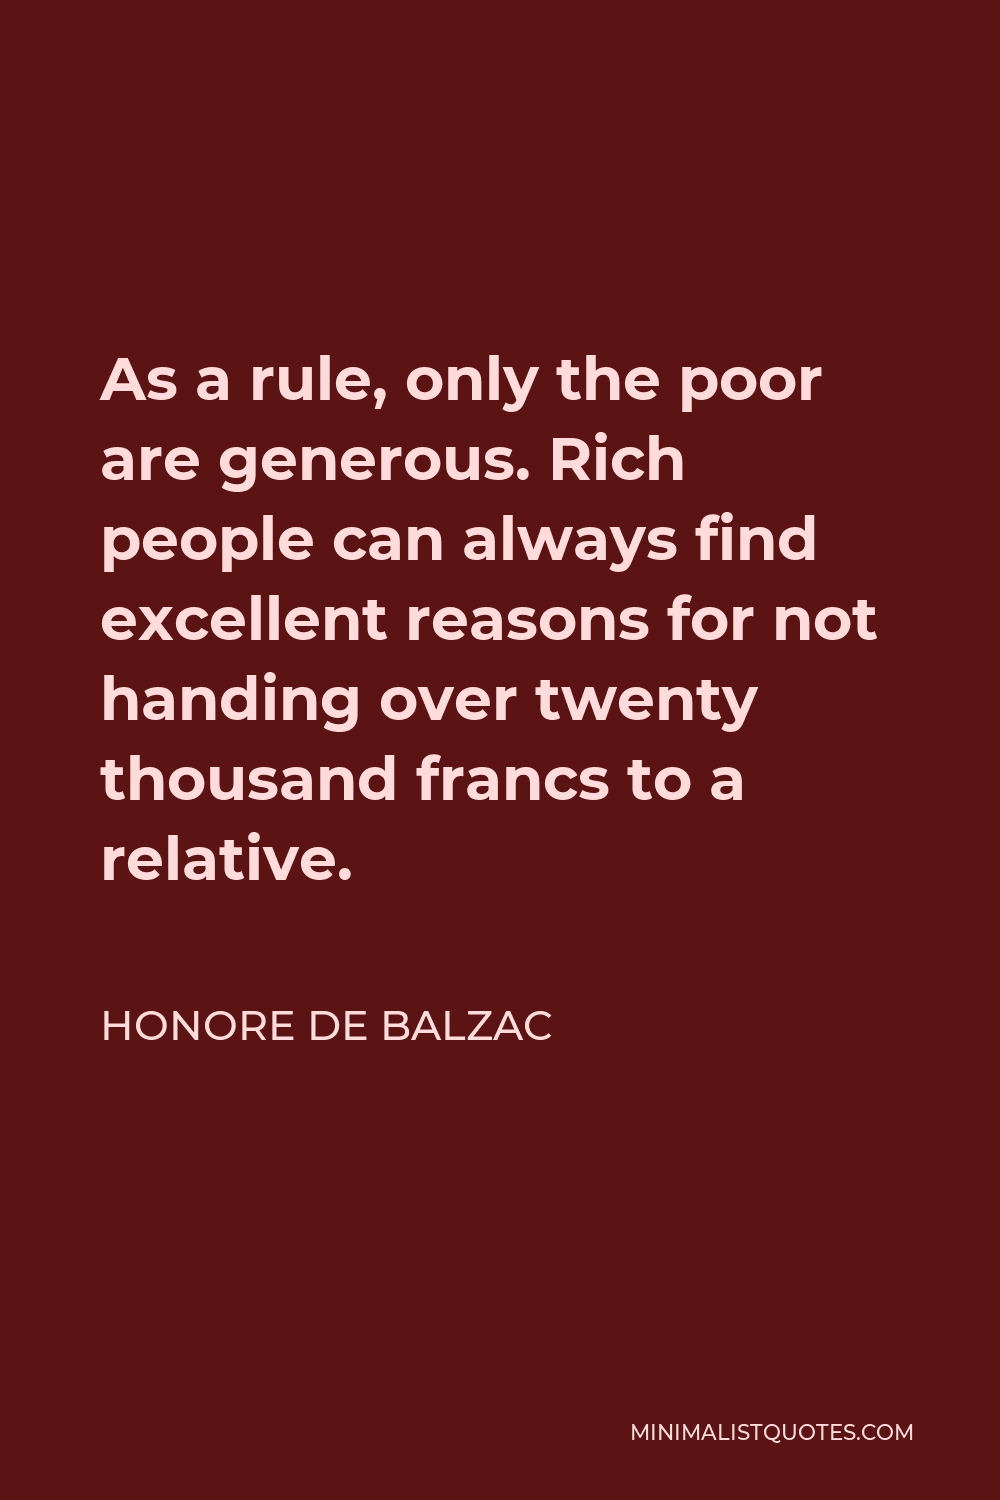 Honore de Balzac Quote - As a rule, only the poor are generous. Rich people can always find excellent reasons for not handing over twenty thousand francs to a relative.